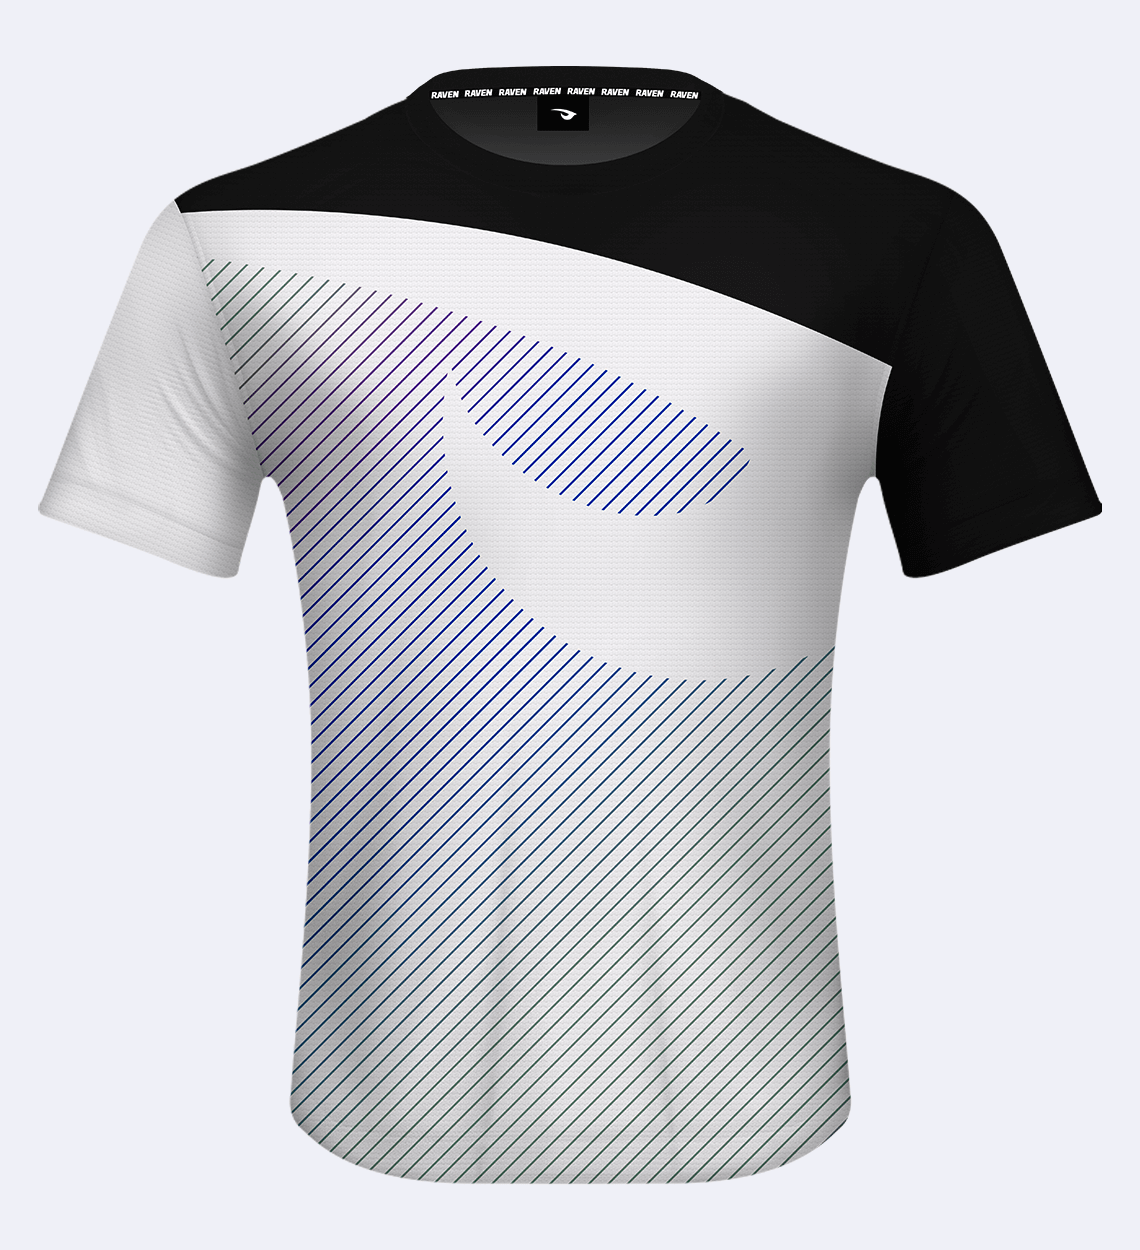 create your own gaming jersey